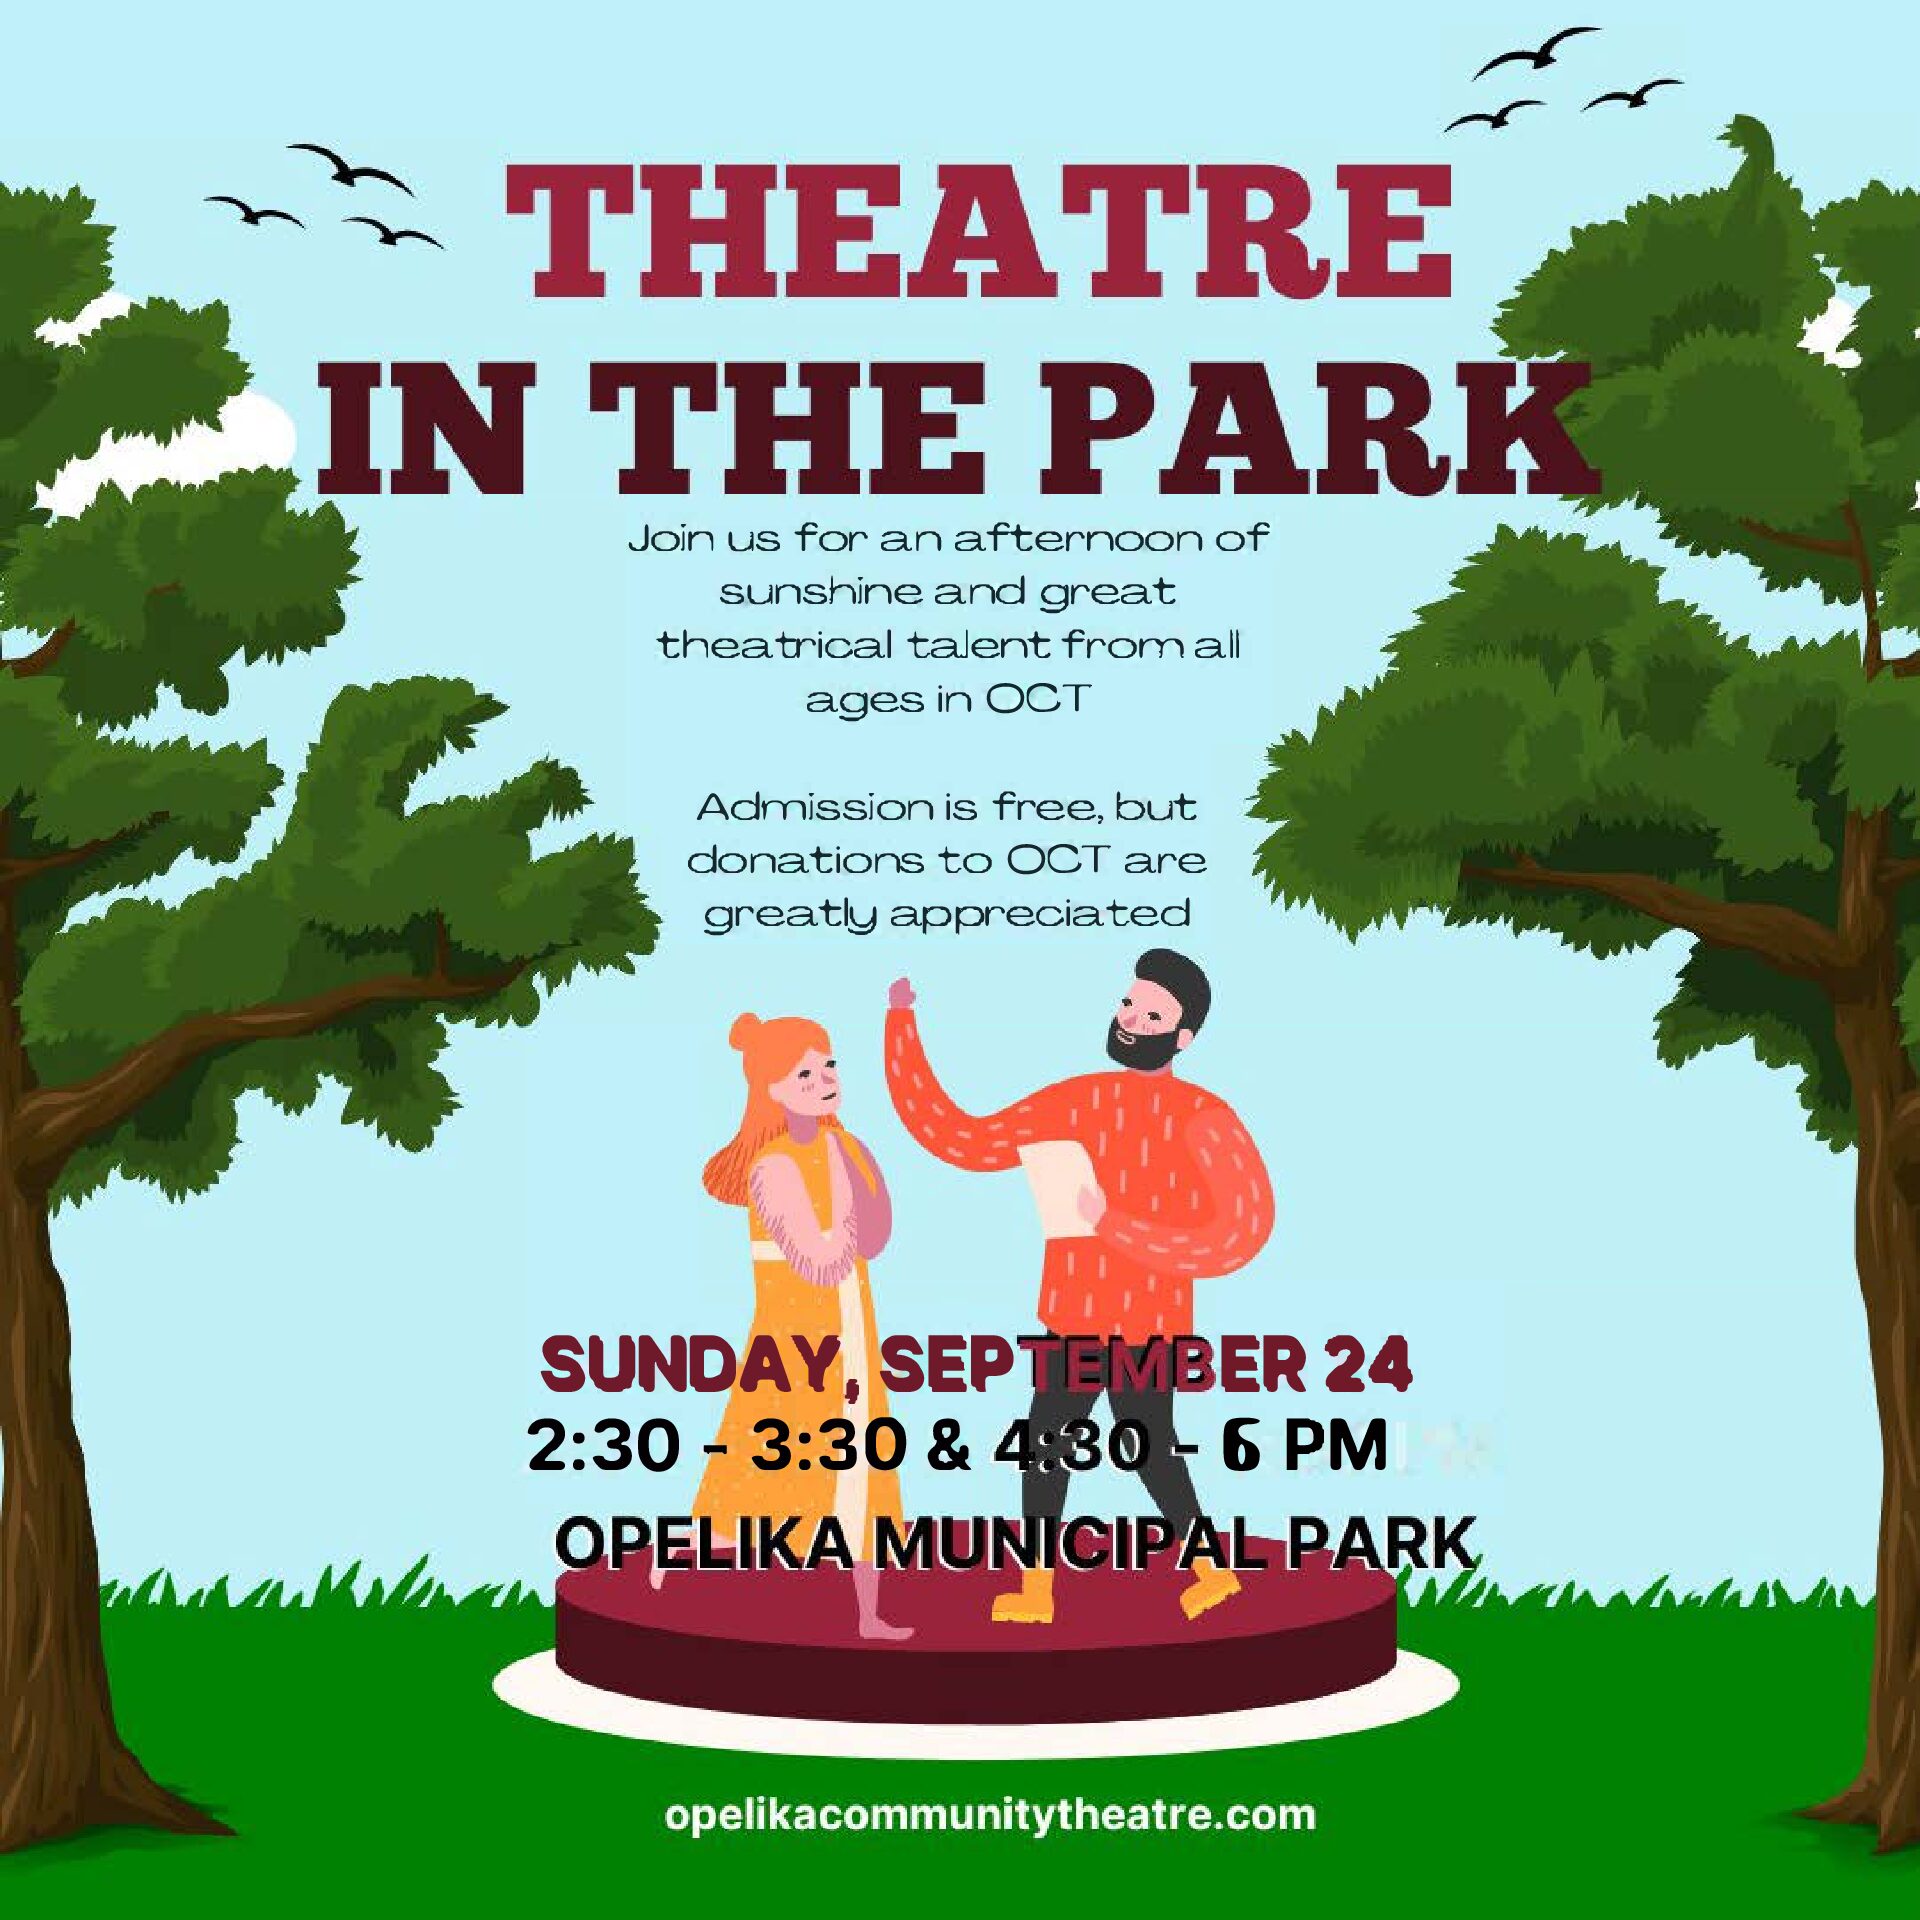 Opelika Community Theatre to host “Theatre in the Park” Sept. 24